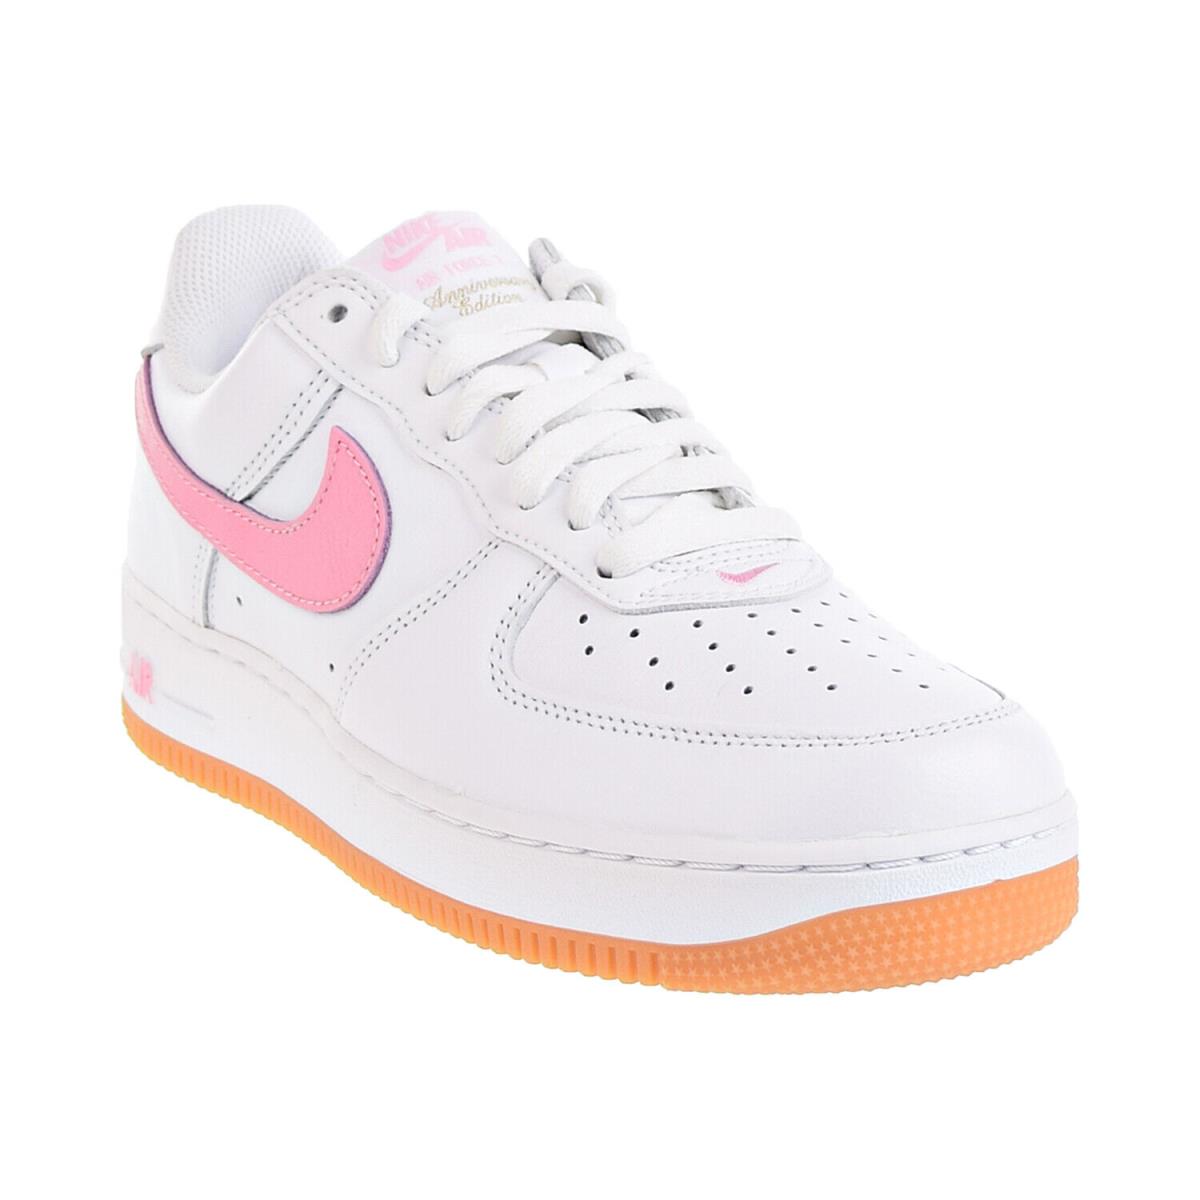 Nike Air Force 1 Low Retro Men`s Shoes White-pink-gum Yellow DM0576-101